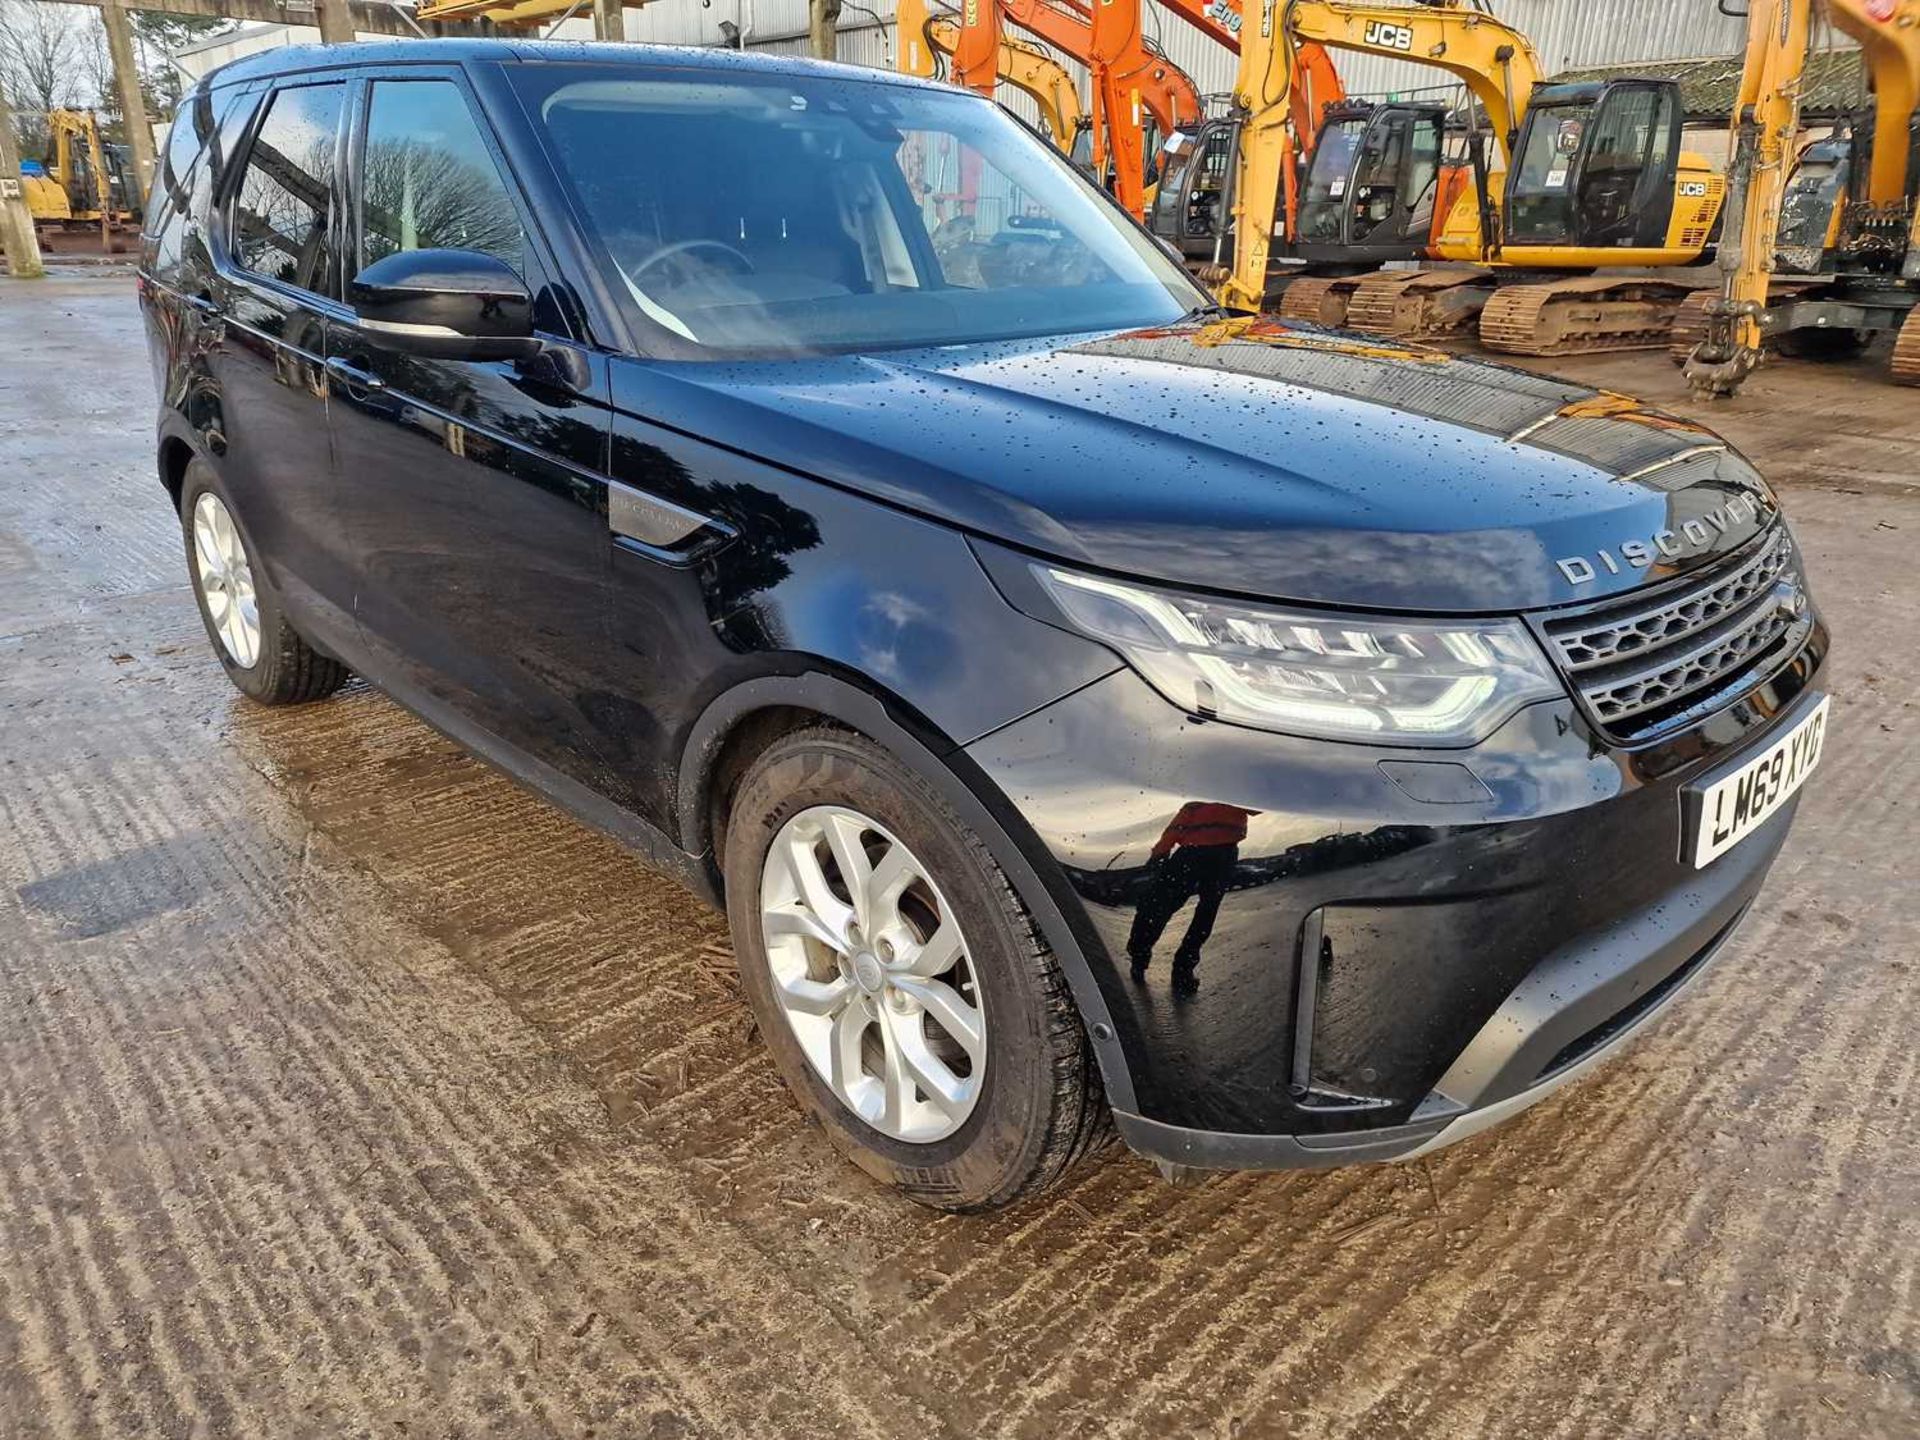 Landrover Discovery SD4 SE 240 Commercial, Auto, Paddle Shift, Sat Nav, Reverse Camera, Parking Sens - Image 7 of 52